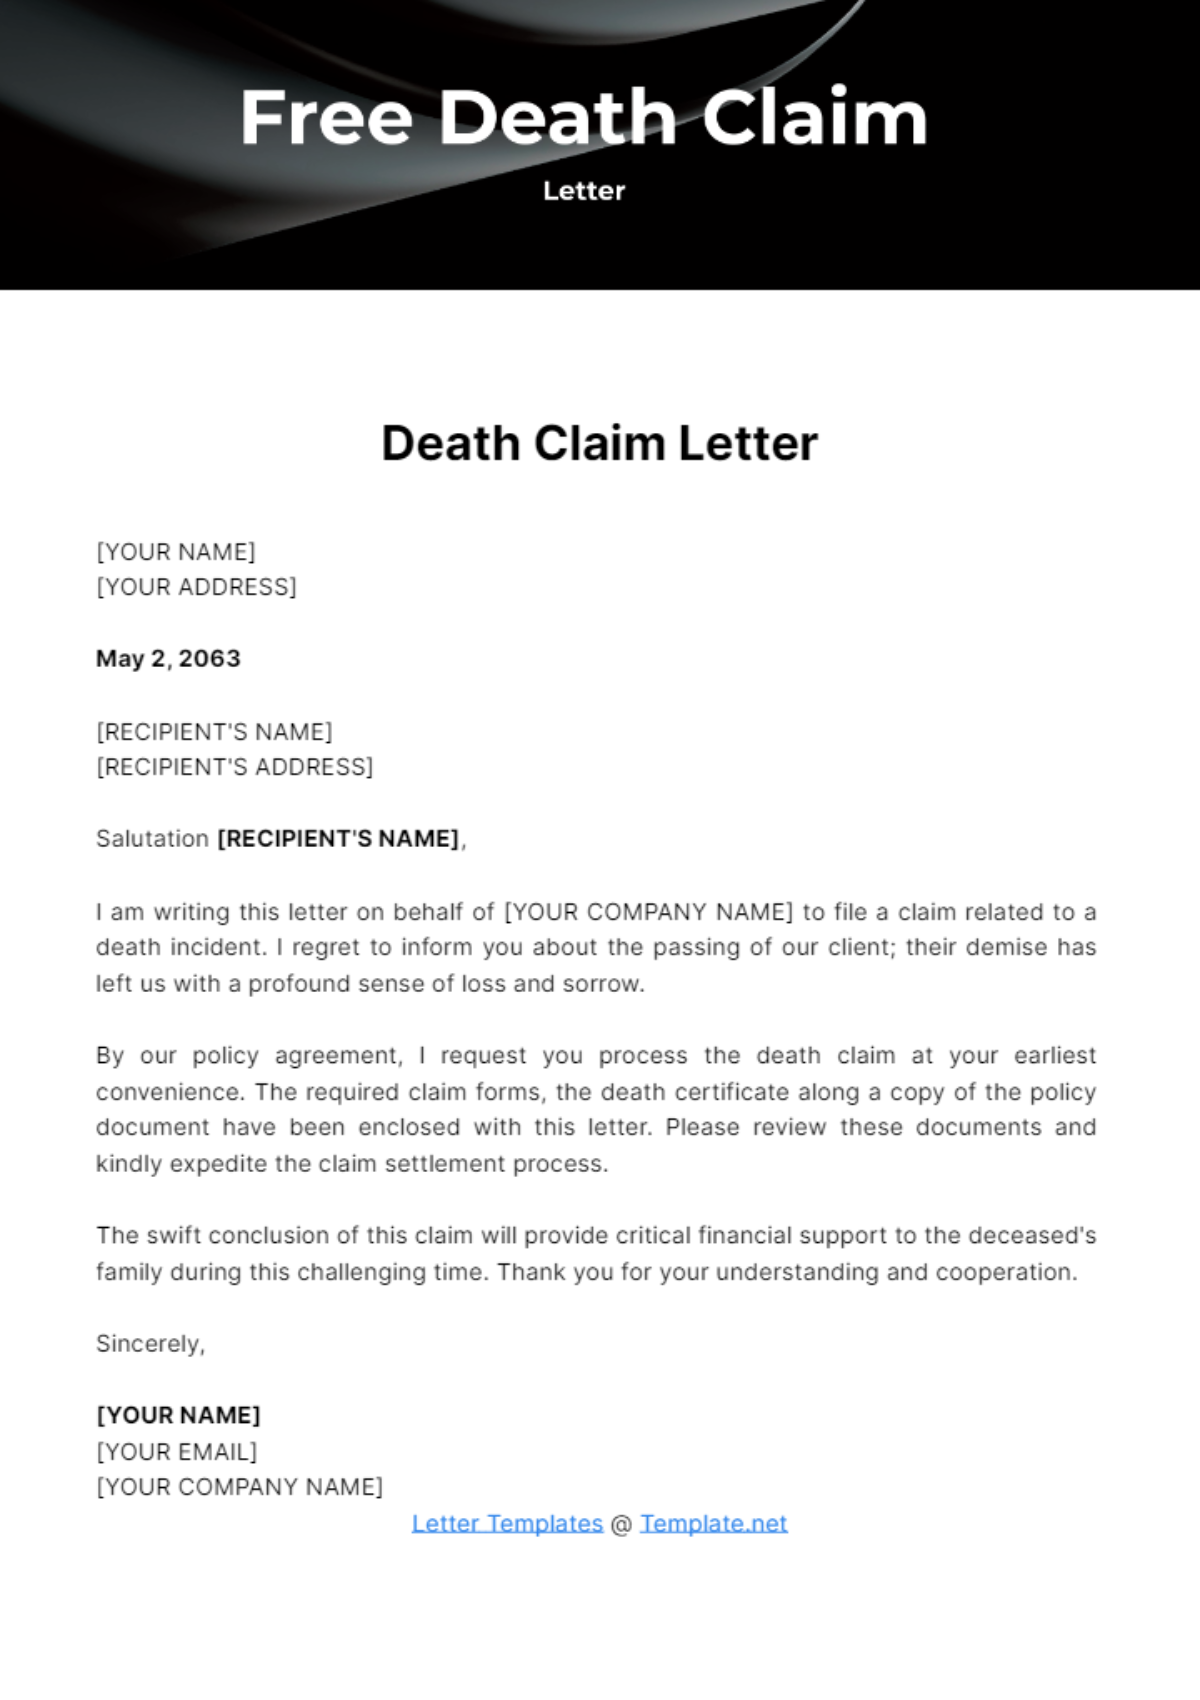 Free Death Claim Letter Template